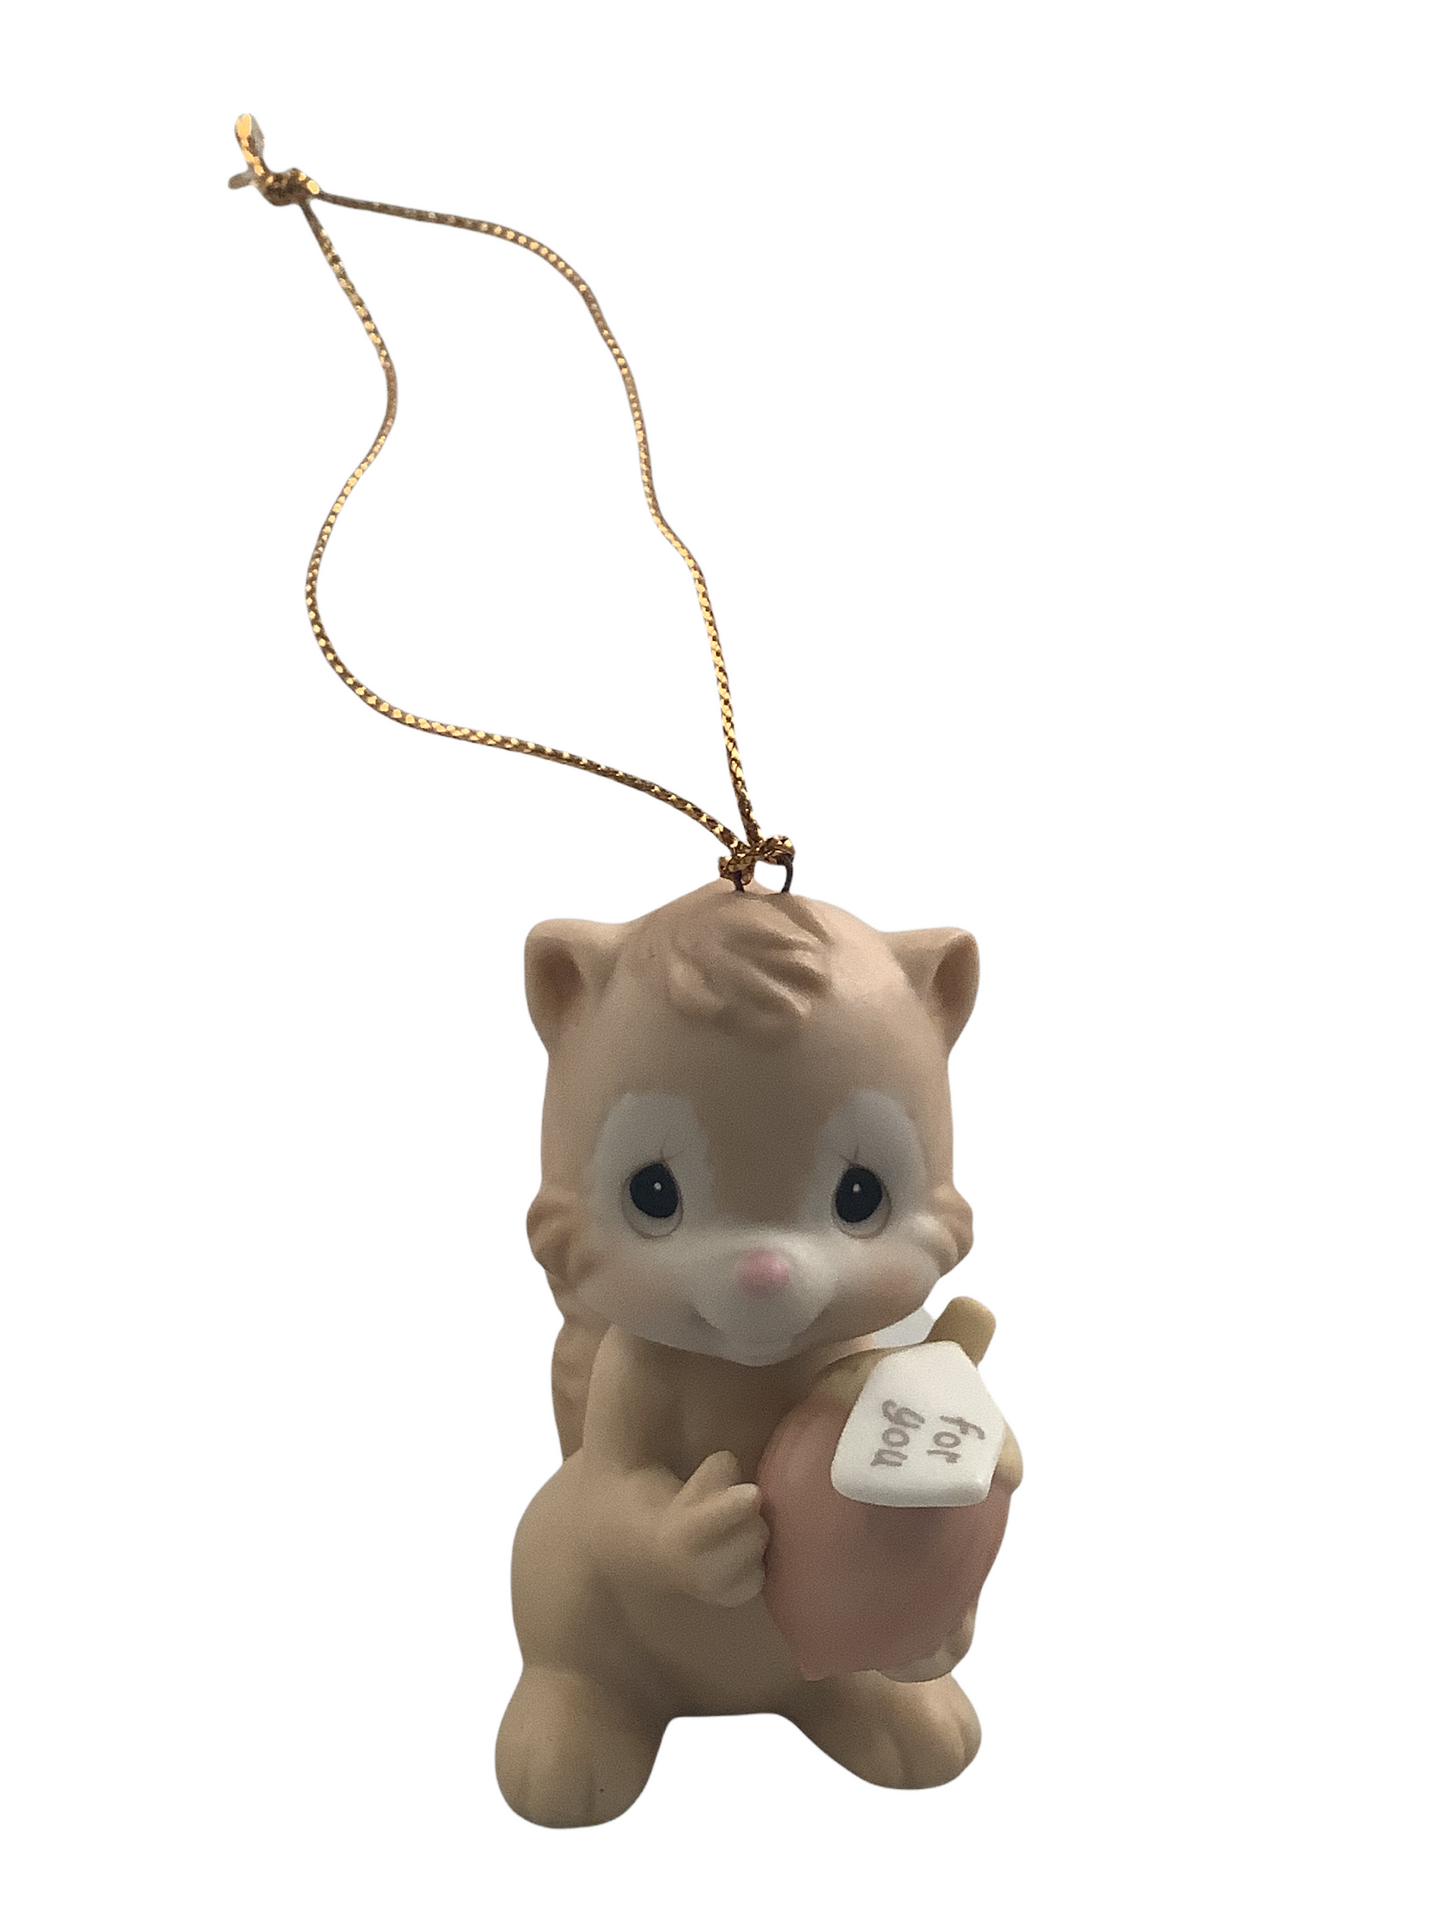 I'm Just Nutty About The Holidays - Precious Moment Ornament